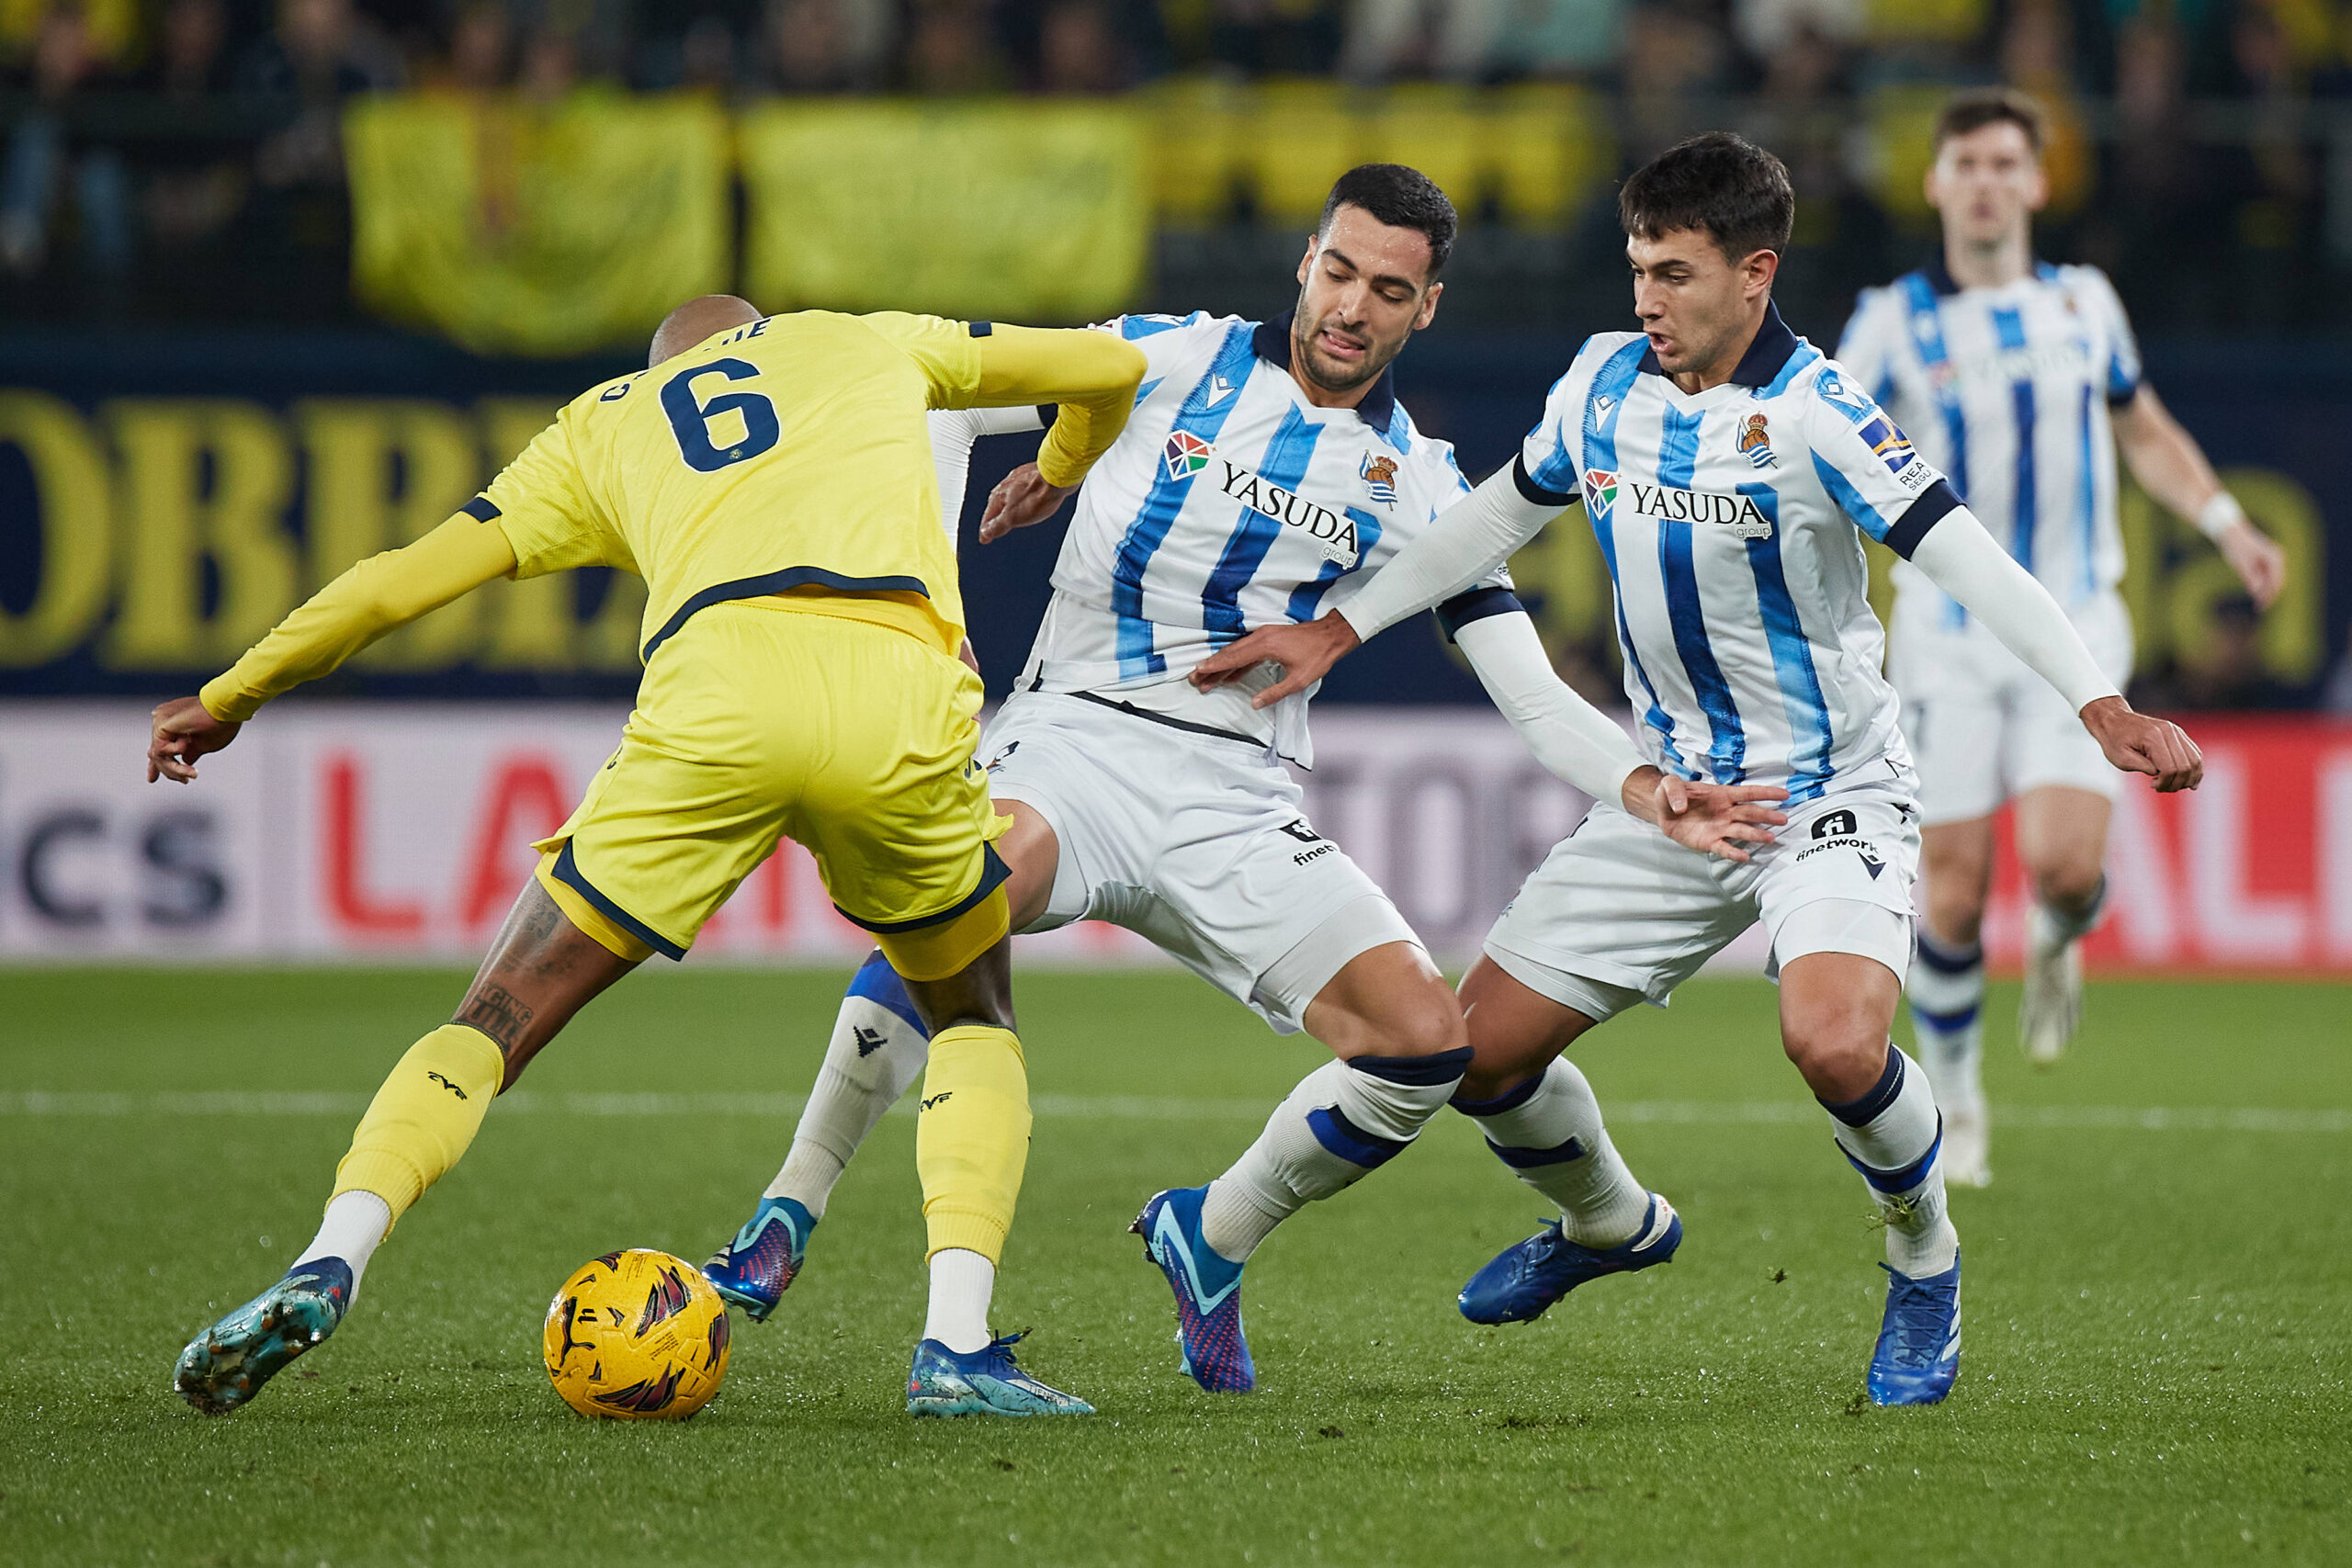 Real Sociedad's Mikel Merino and Martin Zubimendi fighting for the ball with Villarreal's Etienne Capoue.